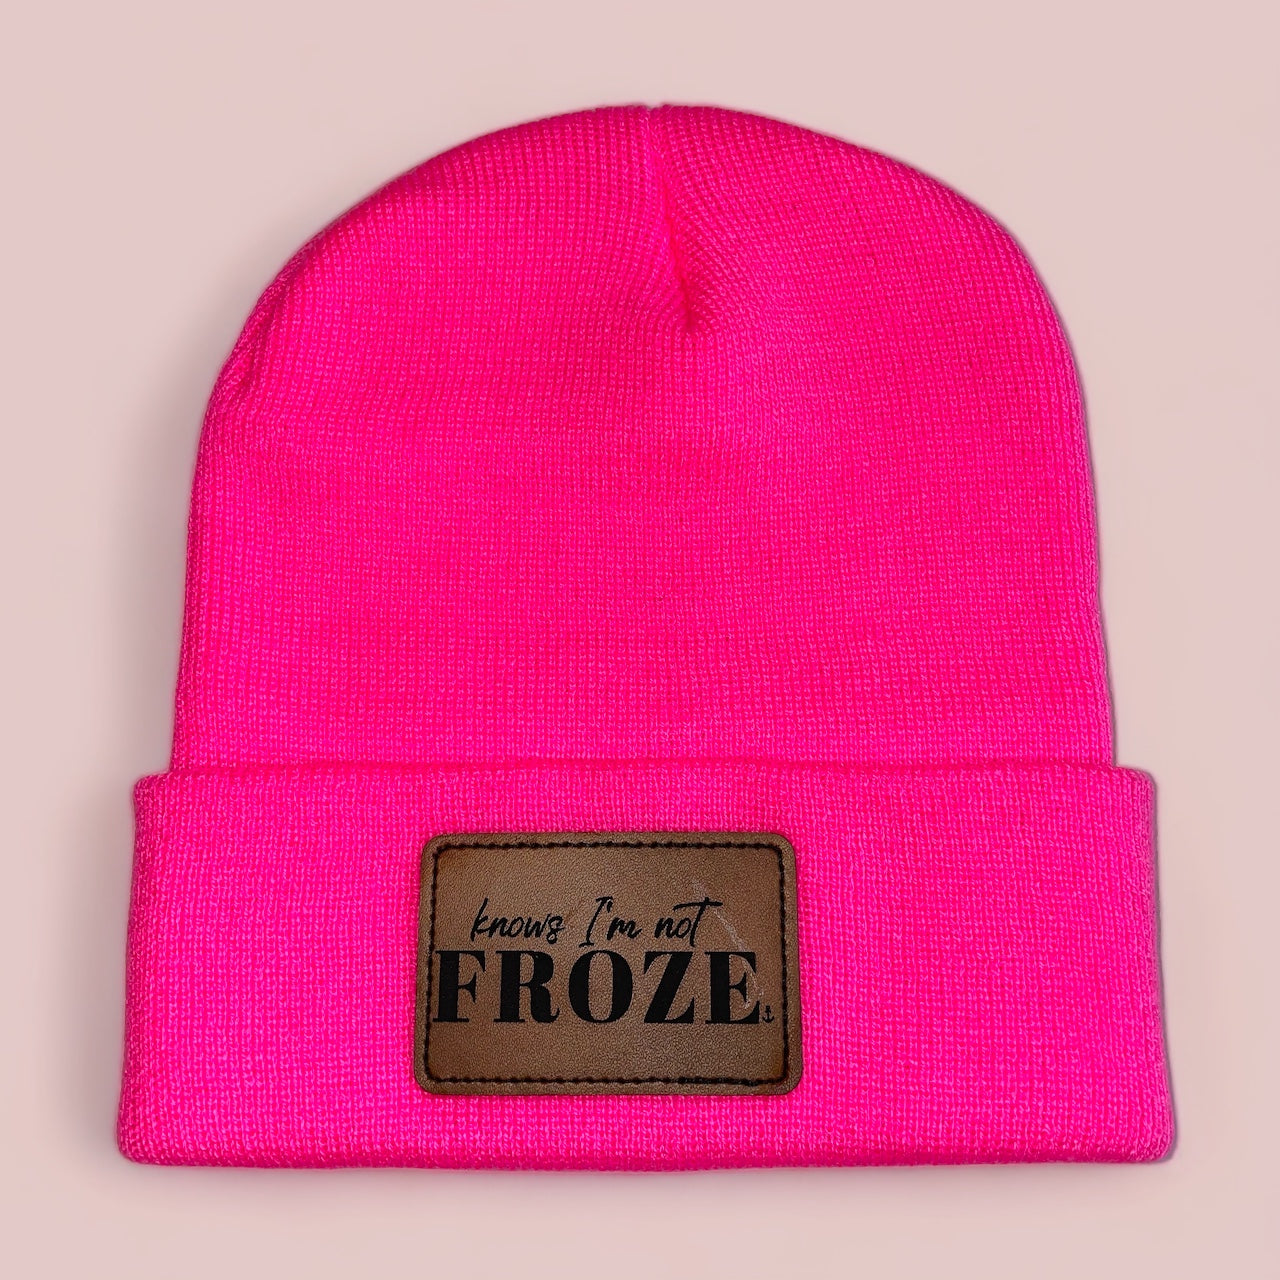 "Knows I'm Not Froze" Beanie